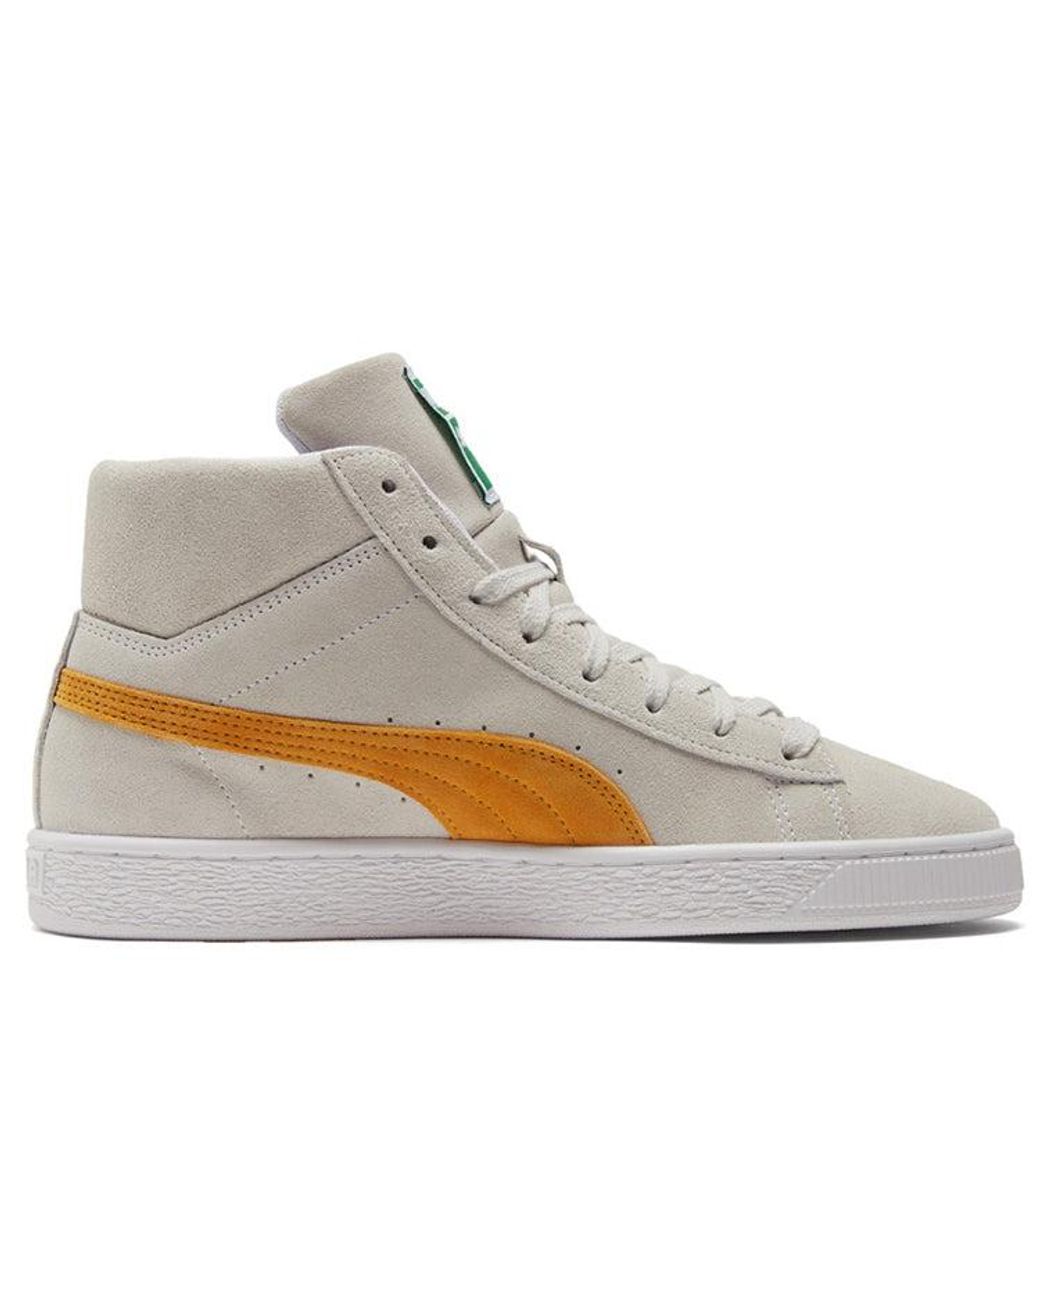 PUMA Suede Mid 21 'white Mineral Yellow' | Lyst